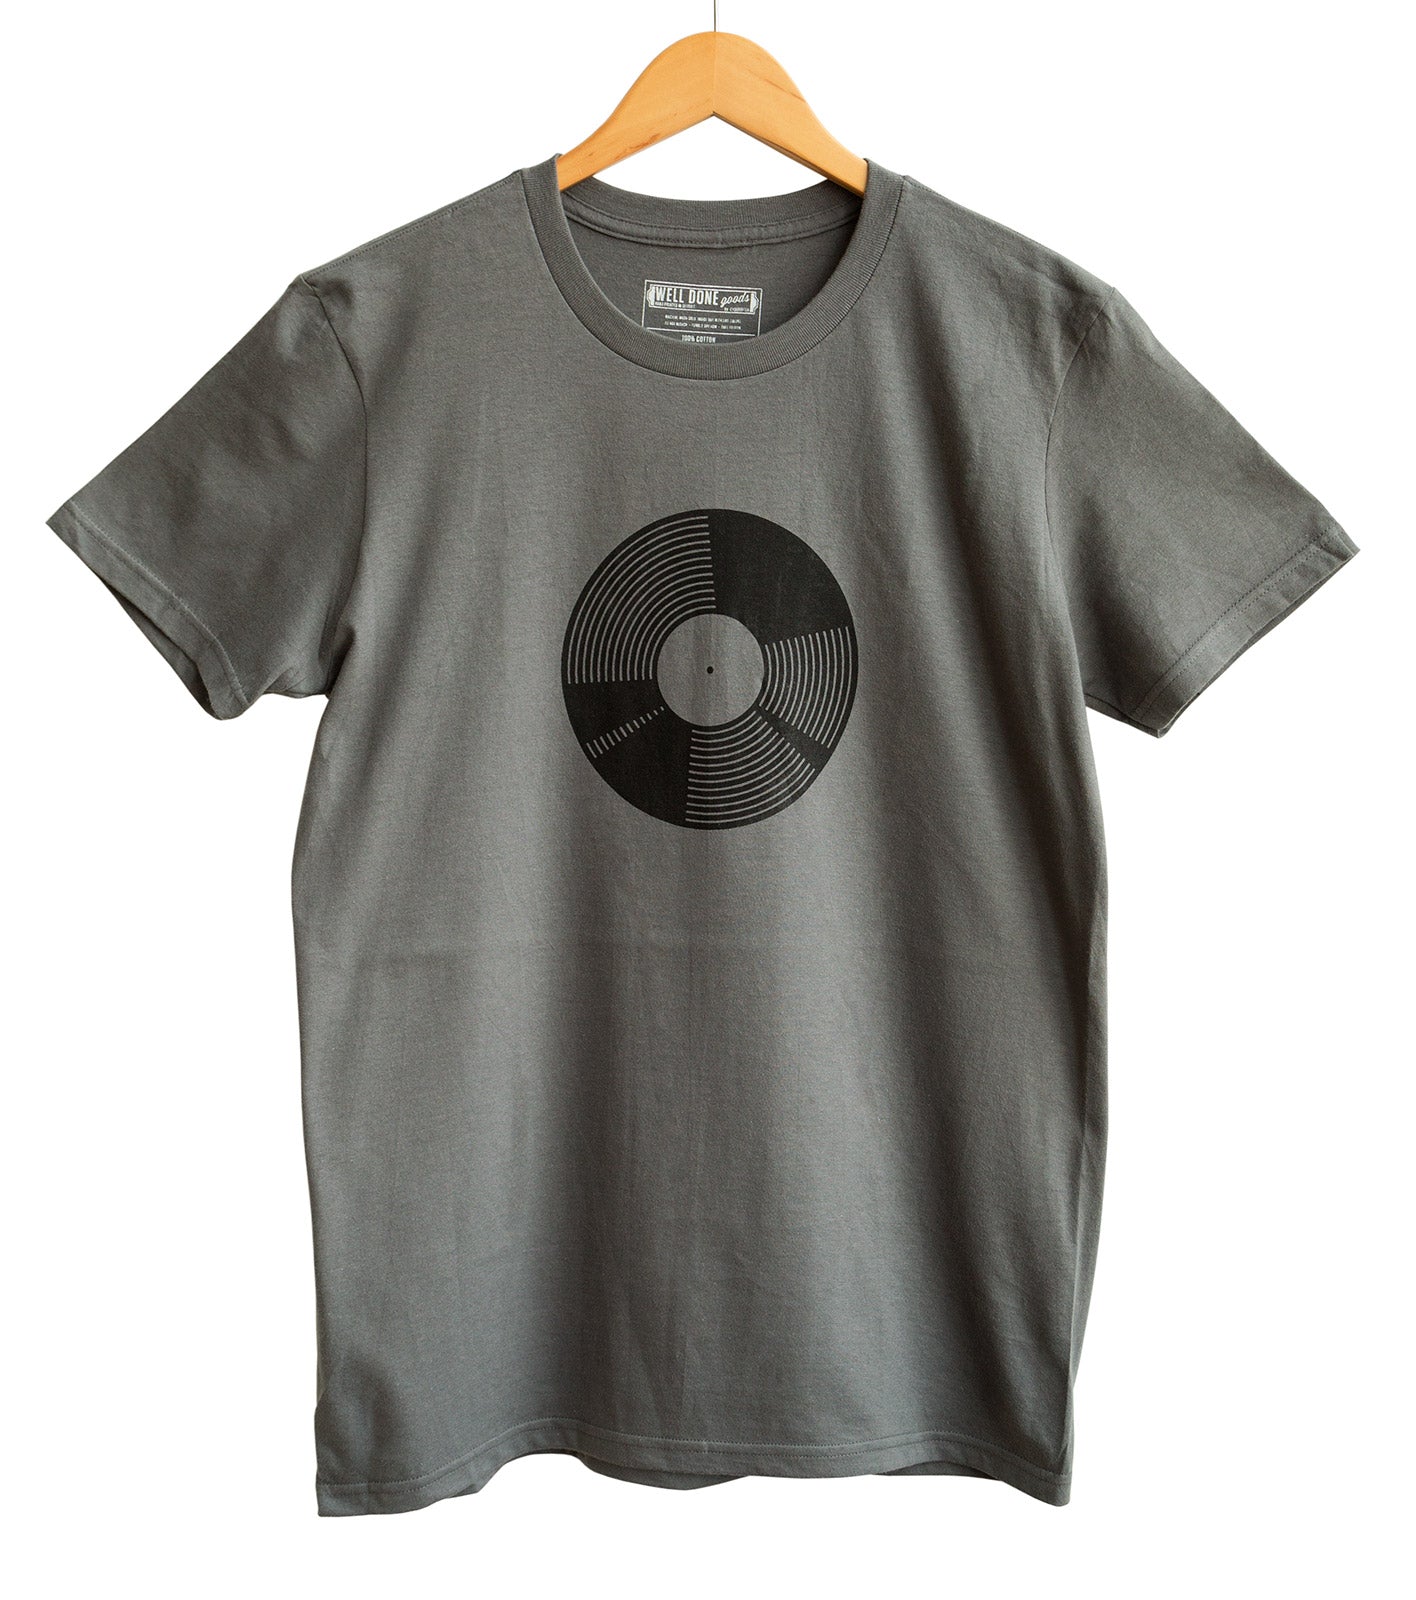 Vinyl Record T-Shirt, 7" and Well Done Goods Done Goods, by Cyberoptix